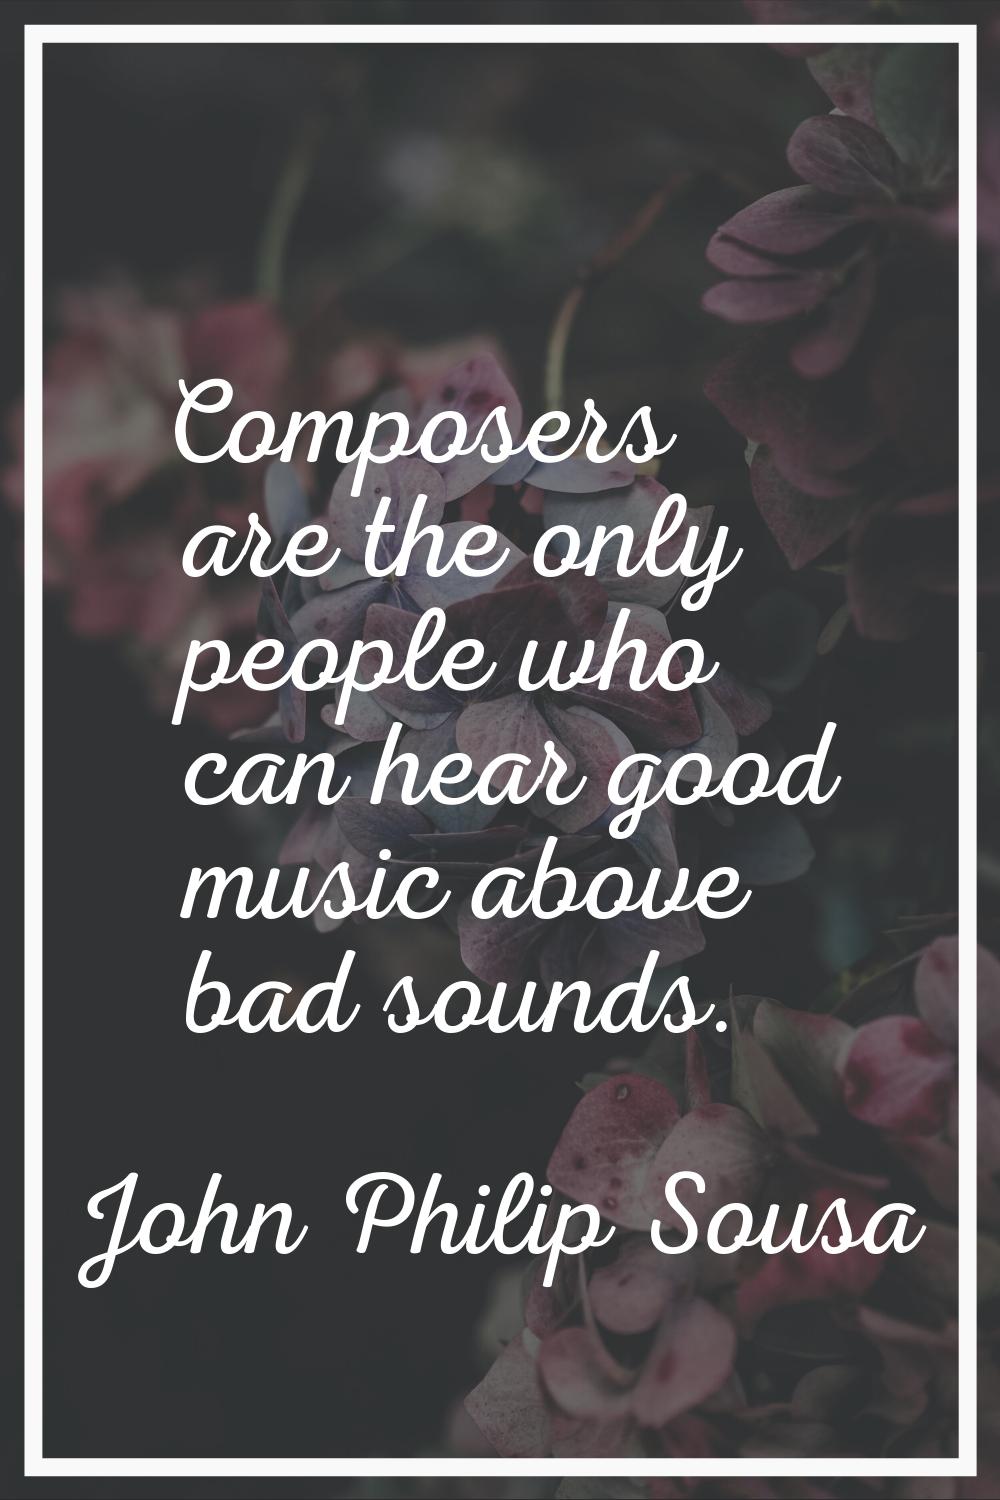 Composers are the only people who can hear good music above bad sounds.